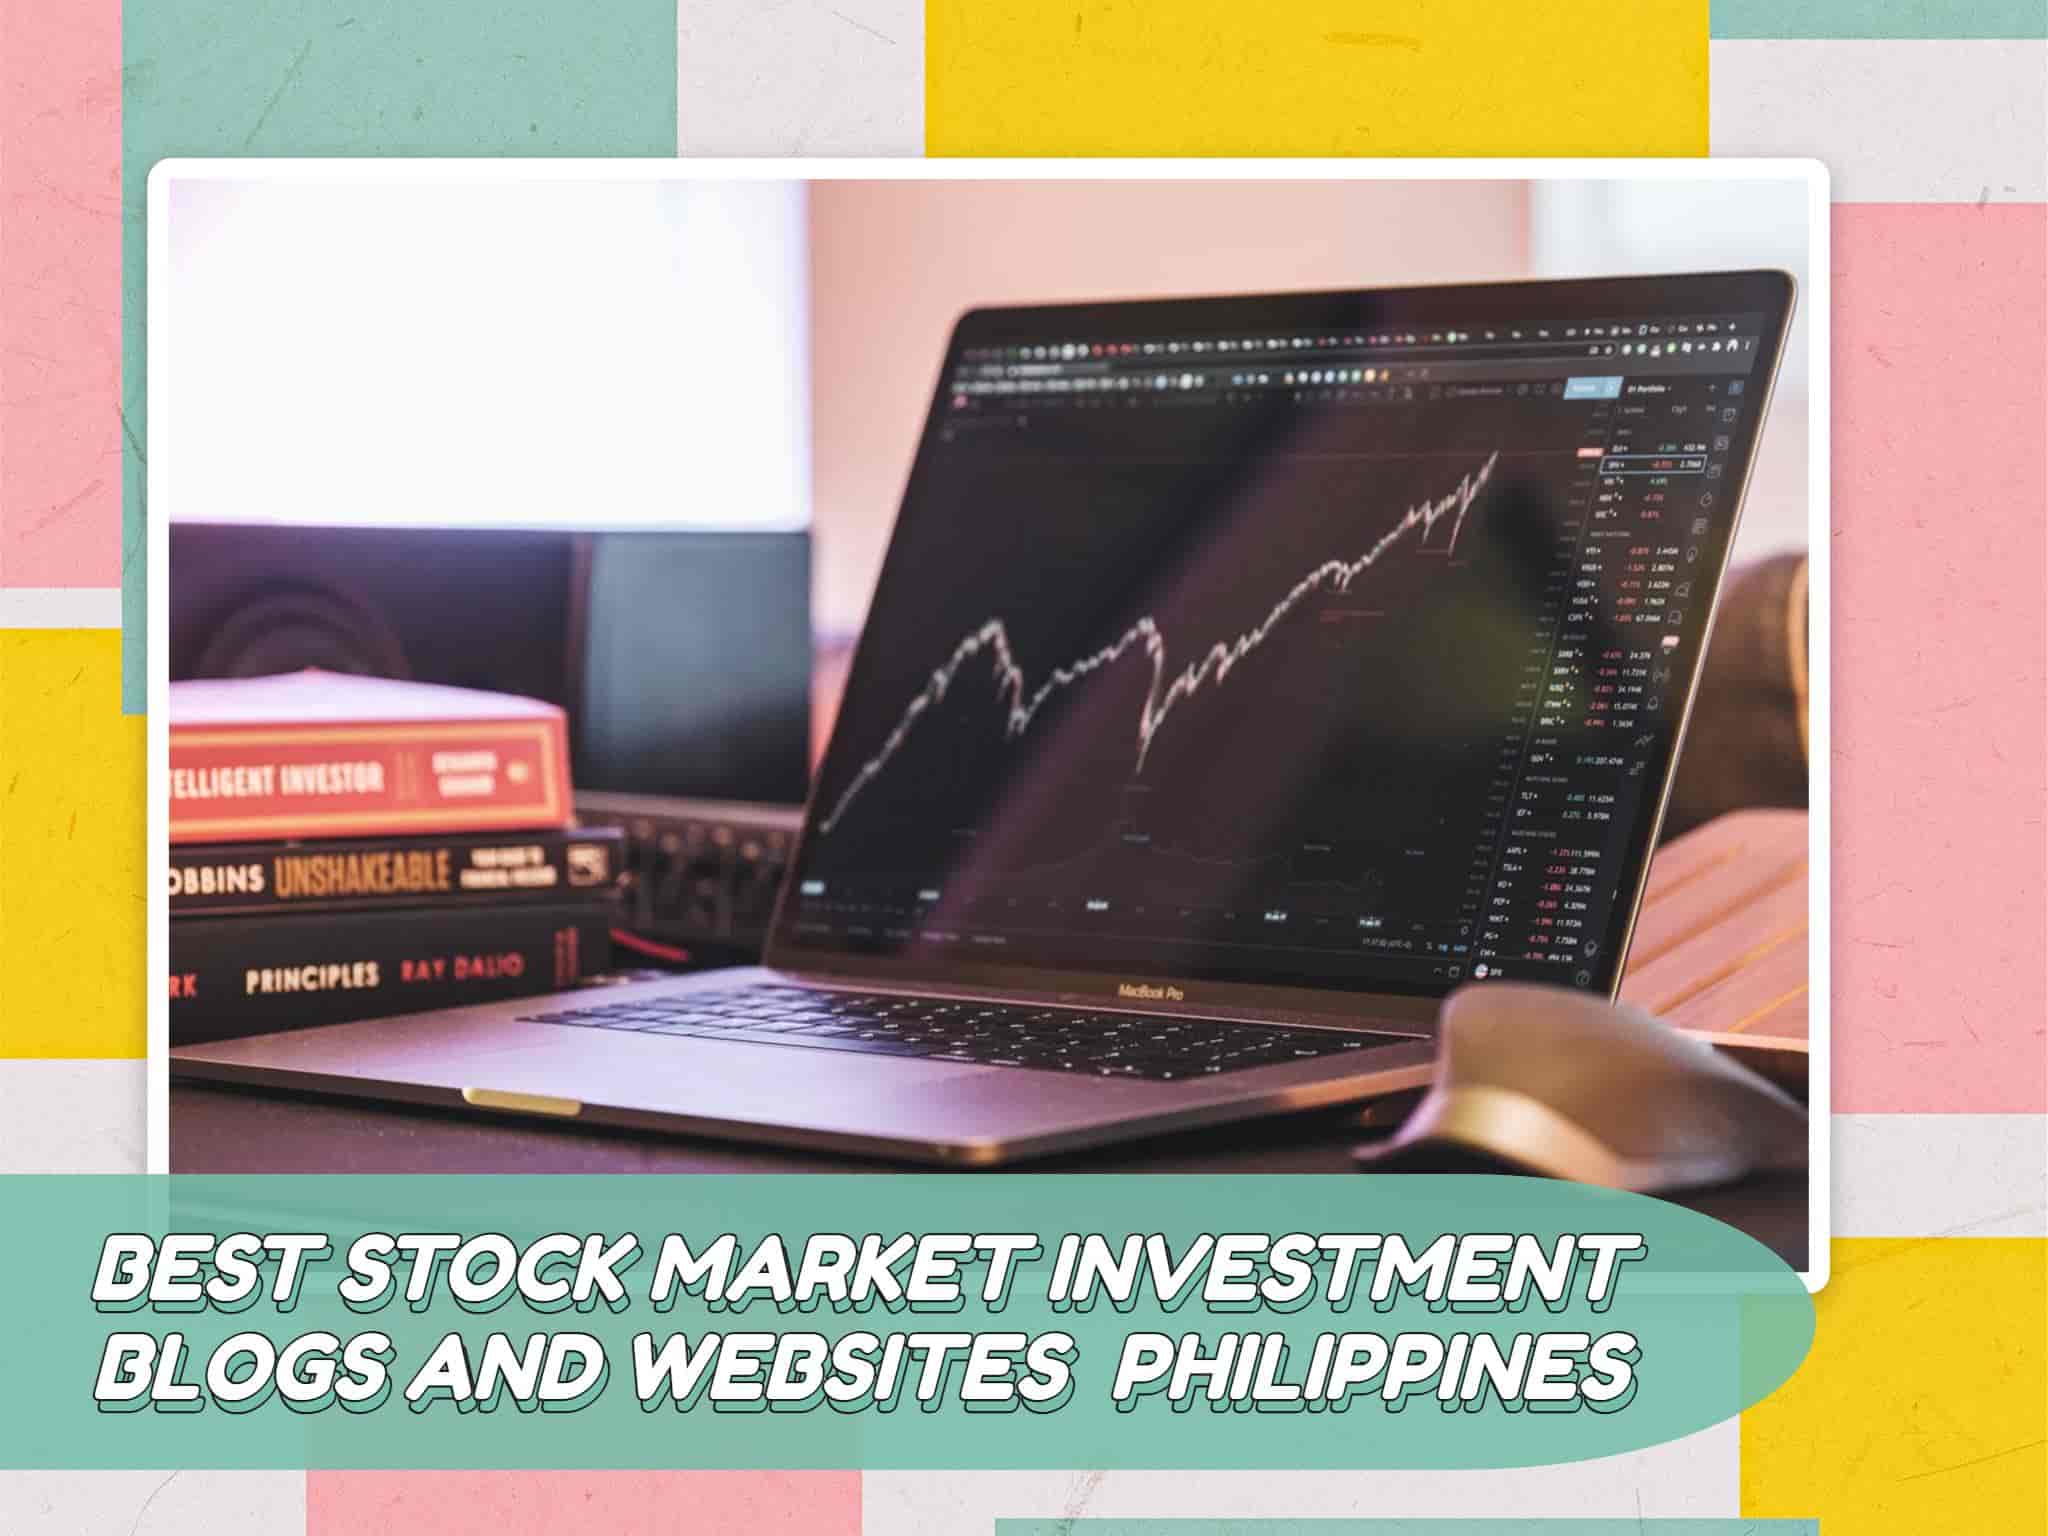 What are the Best Stock Market Investment Blogs And Websites in the Philippines 2022